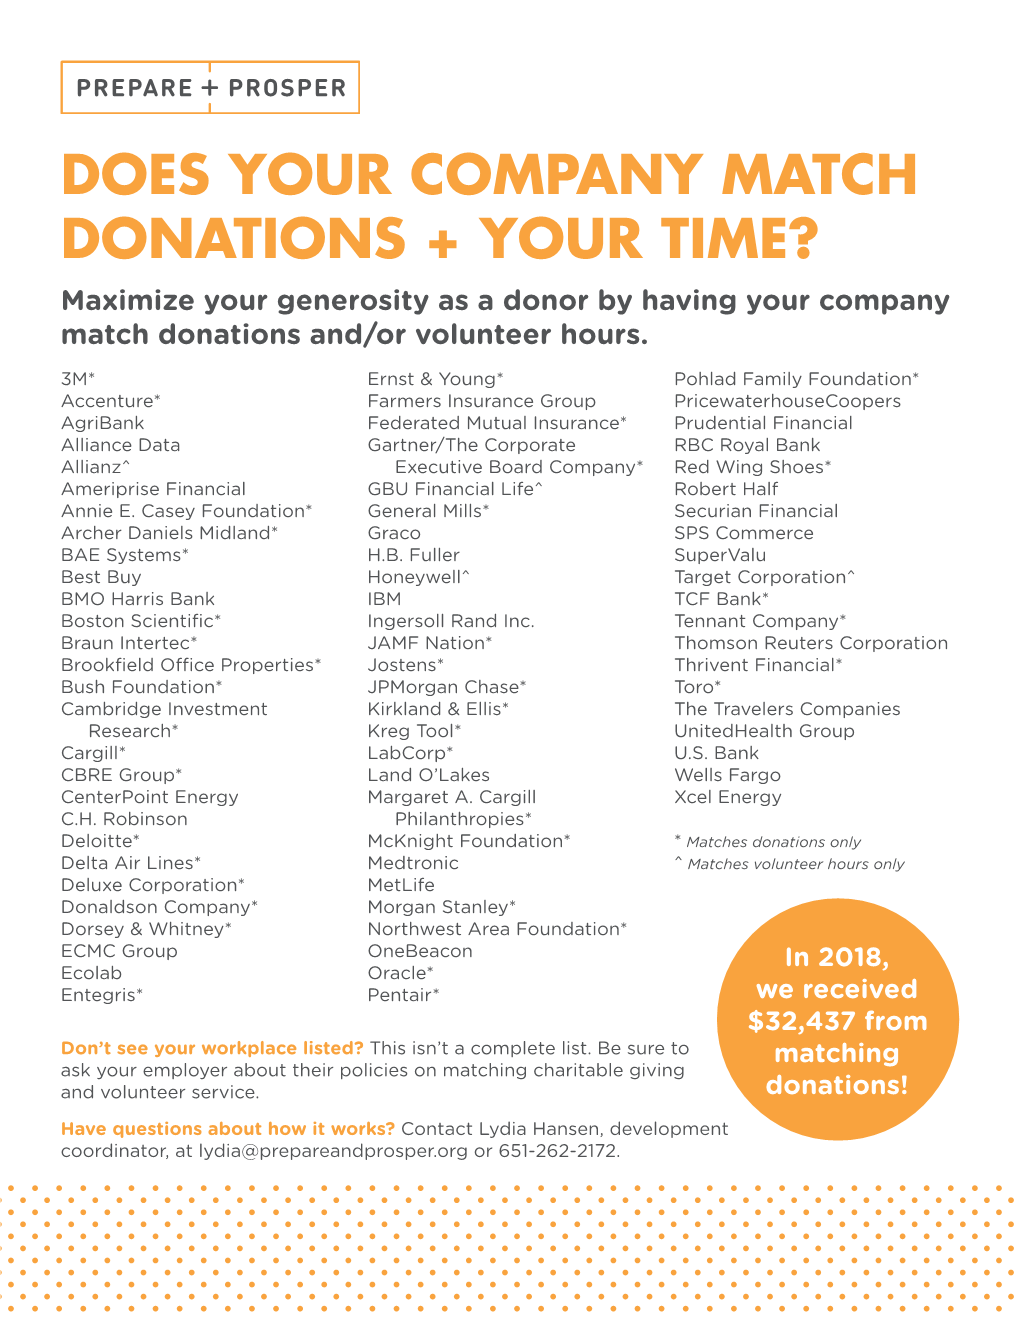 DOES YOUR COMPANY MATCH DONATIONS + YOUR TIME? Maximize Your Generosity As a Donor by Having Your Company Match Donations And/Or Volunteer Hours